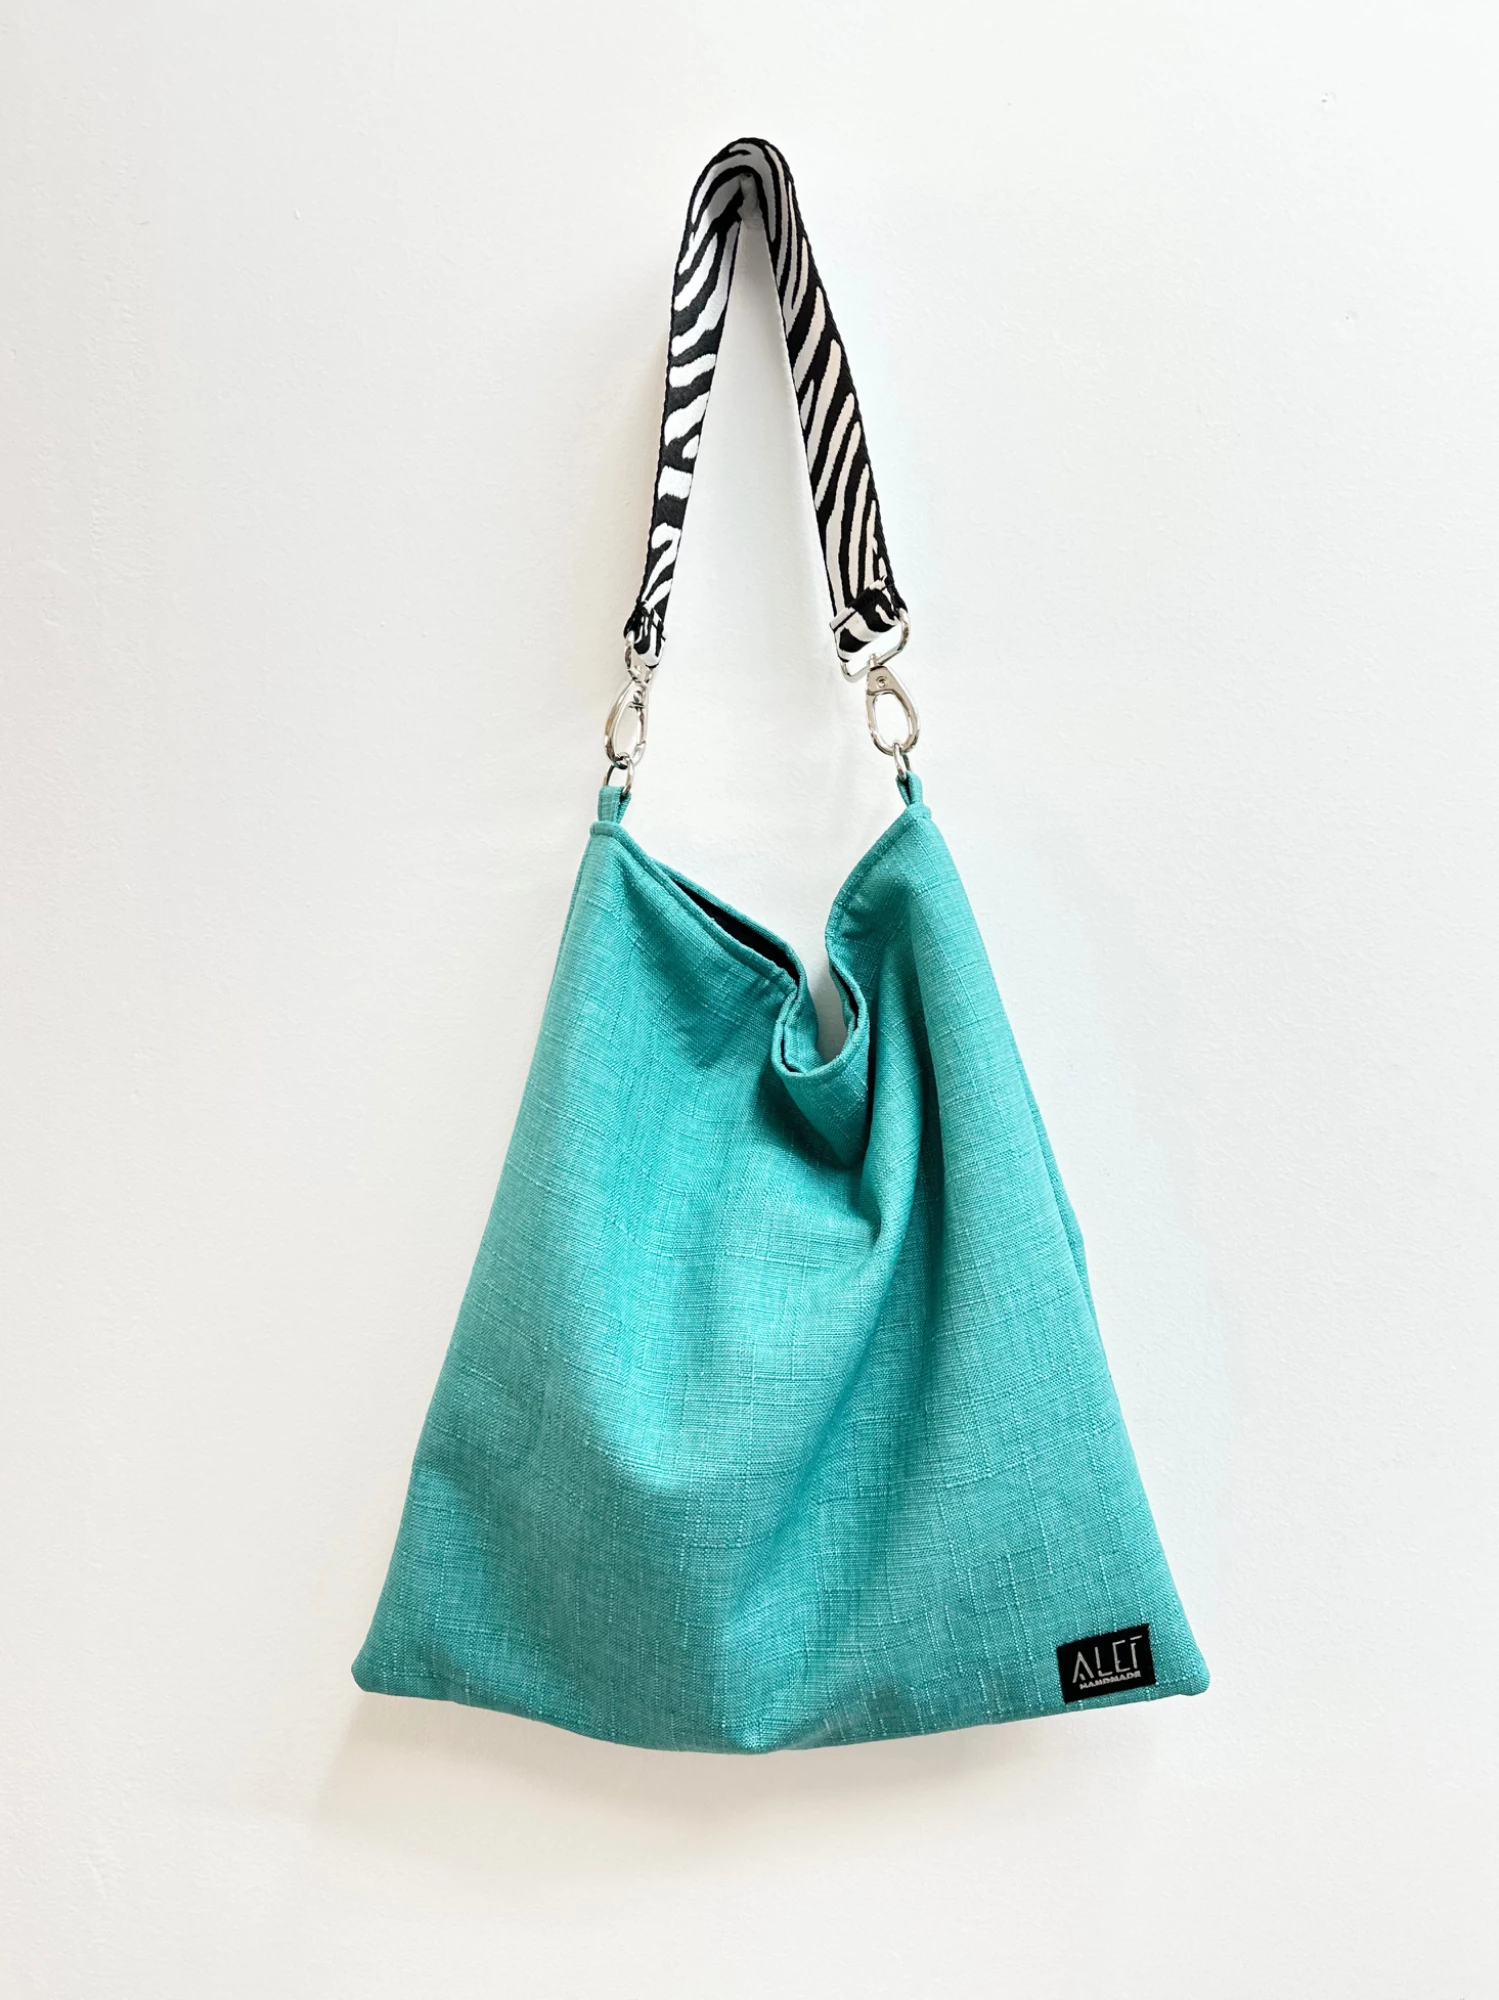 ✨NEW COLOR✨ The city shoulder bag in Turquoise!